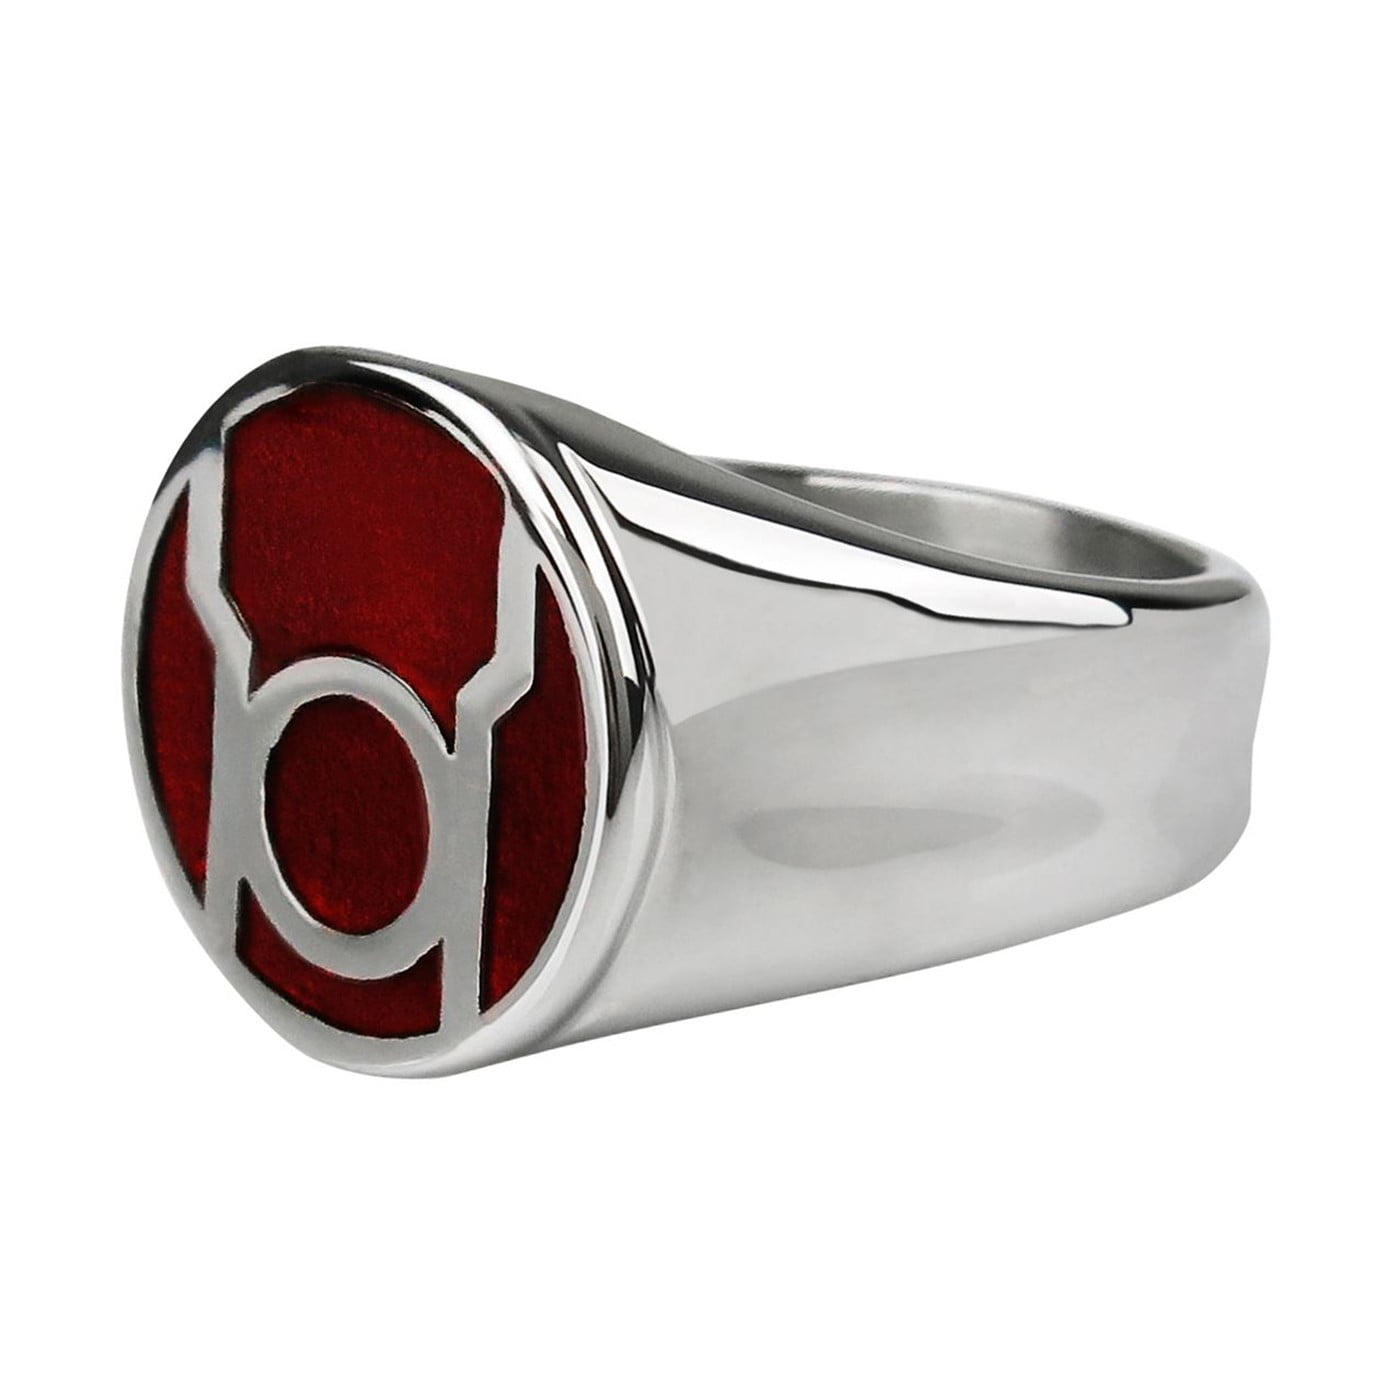 made in USA Translucent Red Resin Red Lantern Movie Ring 